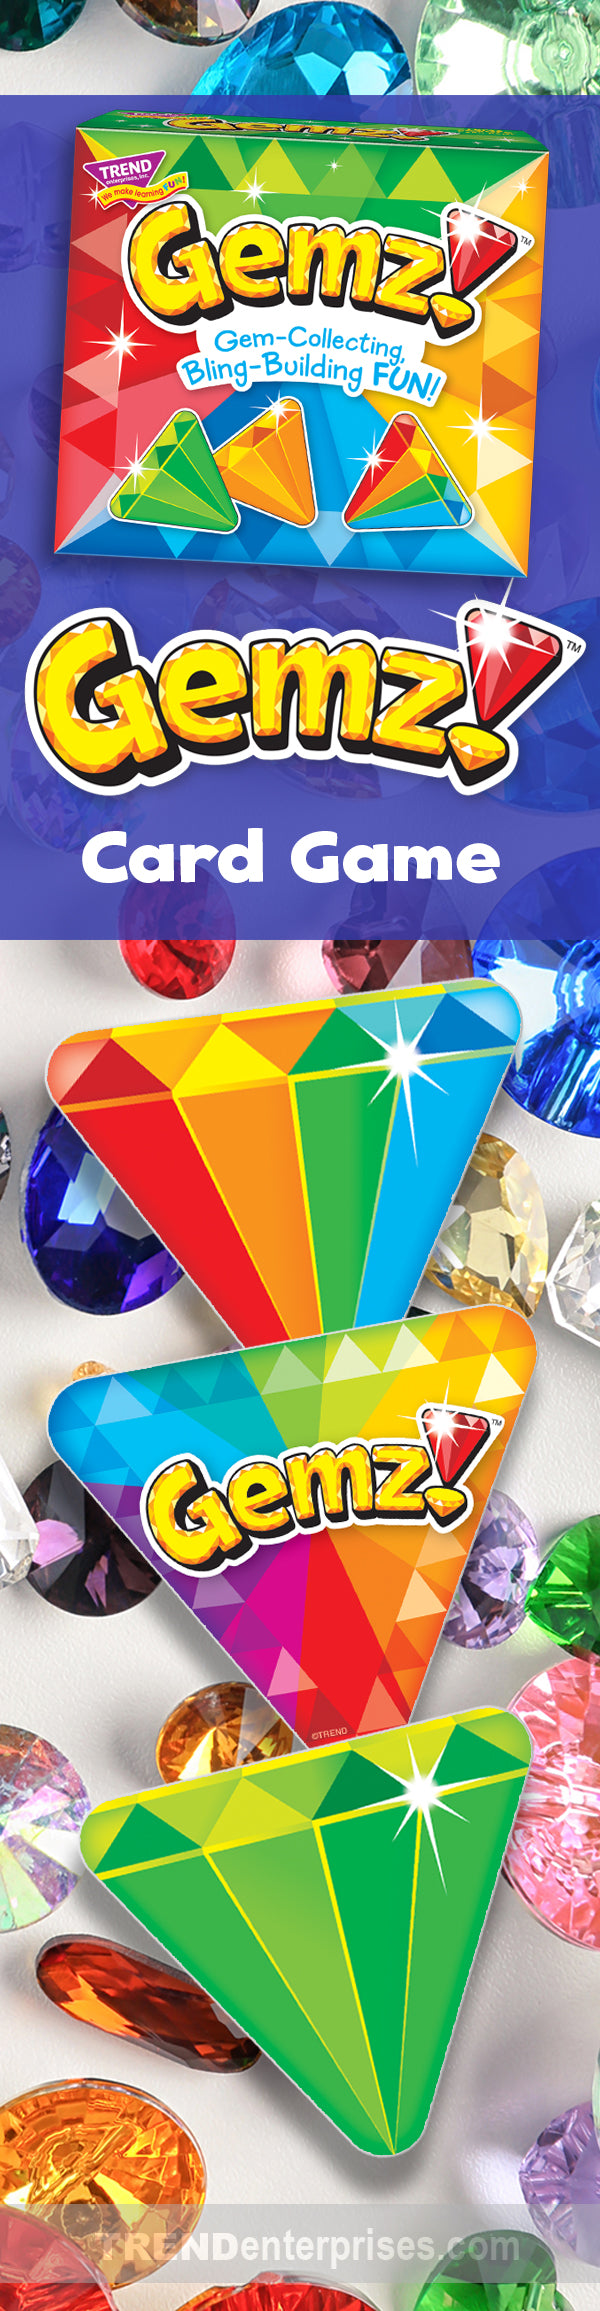 Gemz!™ fun family card game for all ages! Get ready for gem-collecting, bling-building FUN! Draw, swap, and switch out cards to watch your gem take shape. Match all six sides to win!